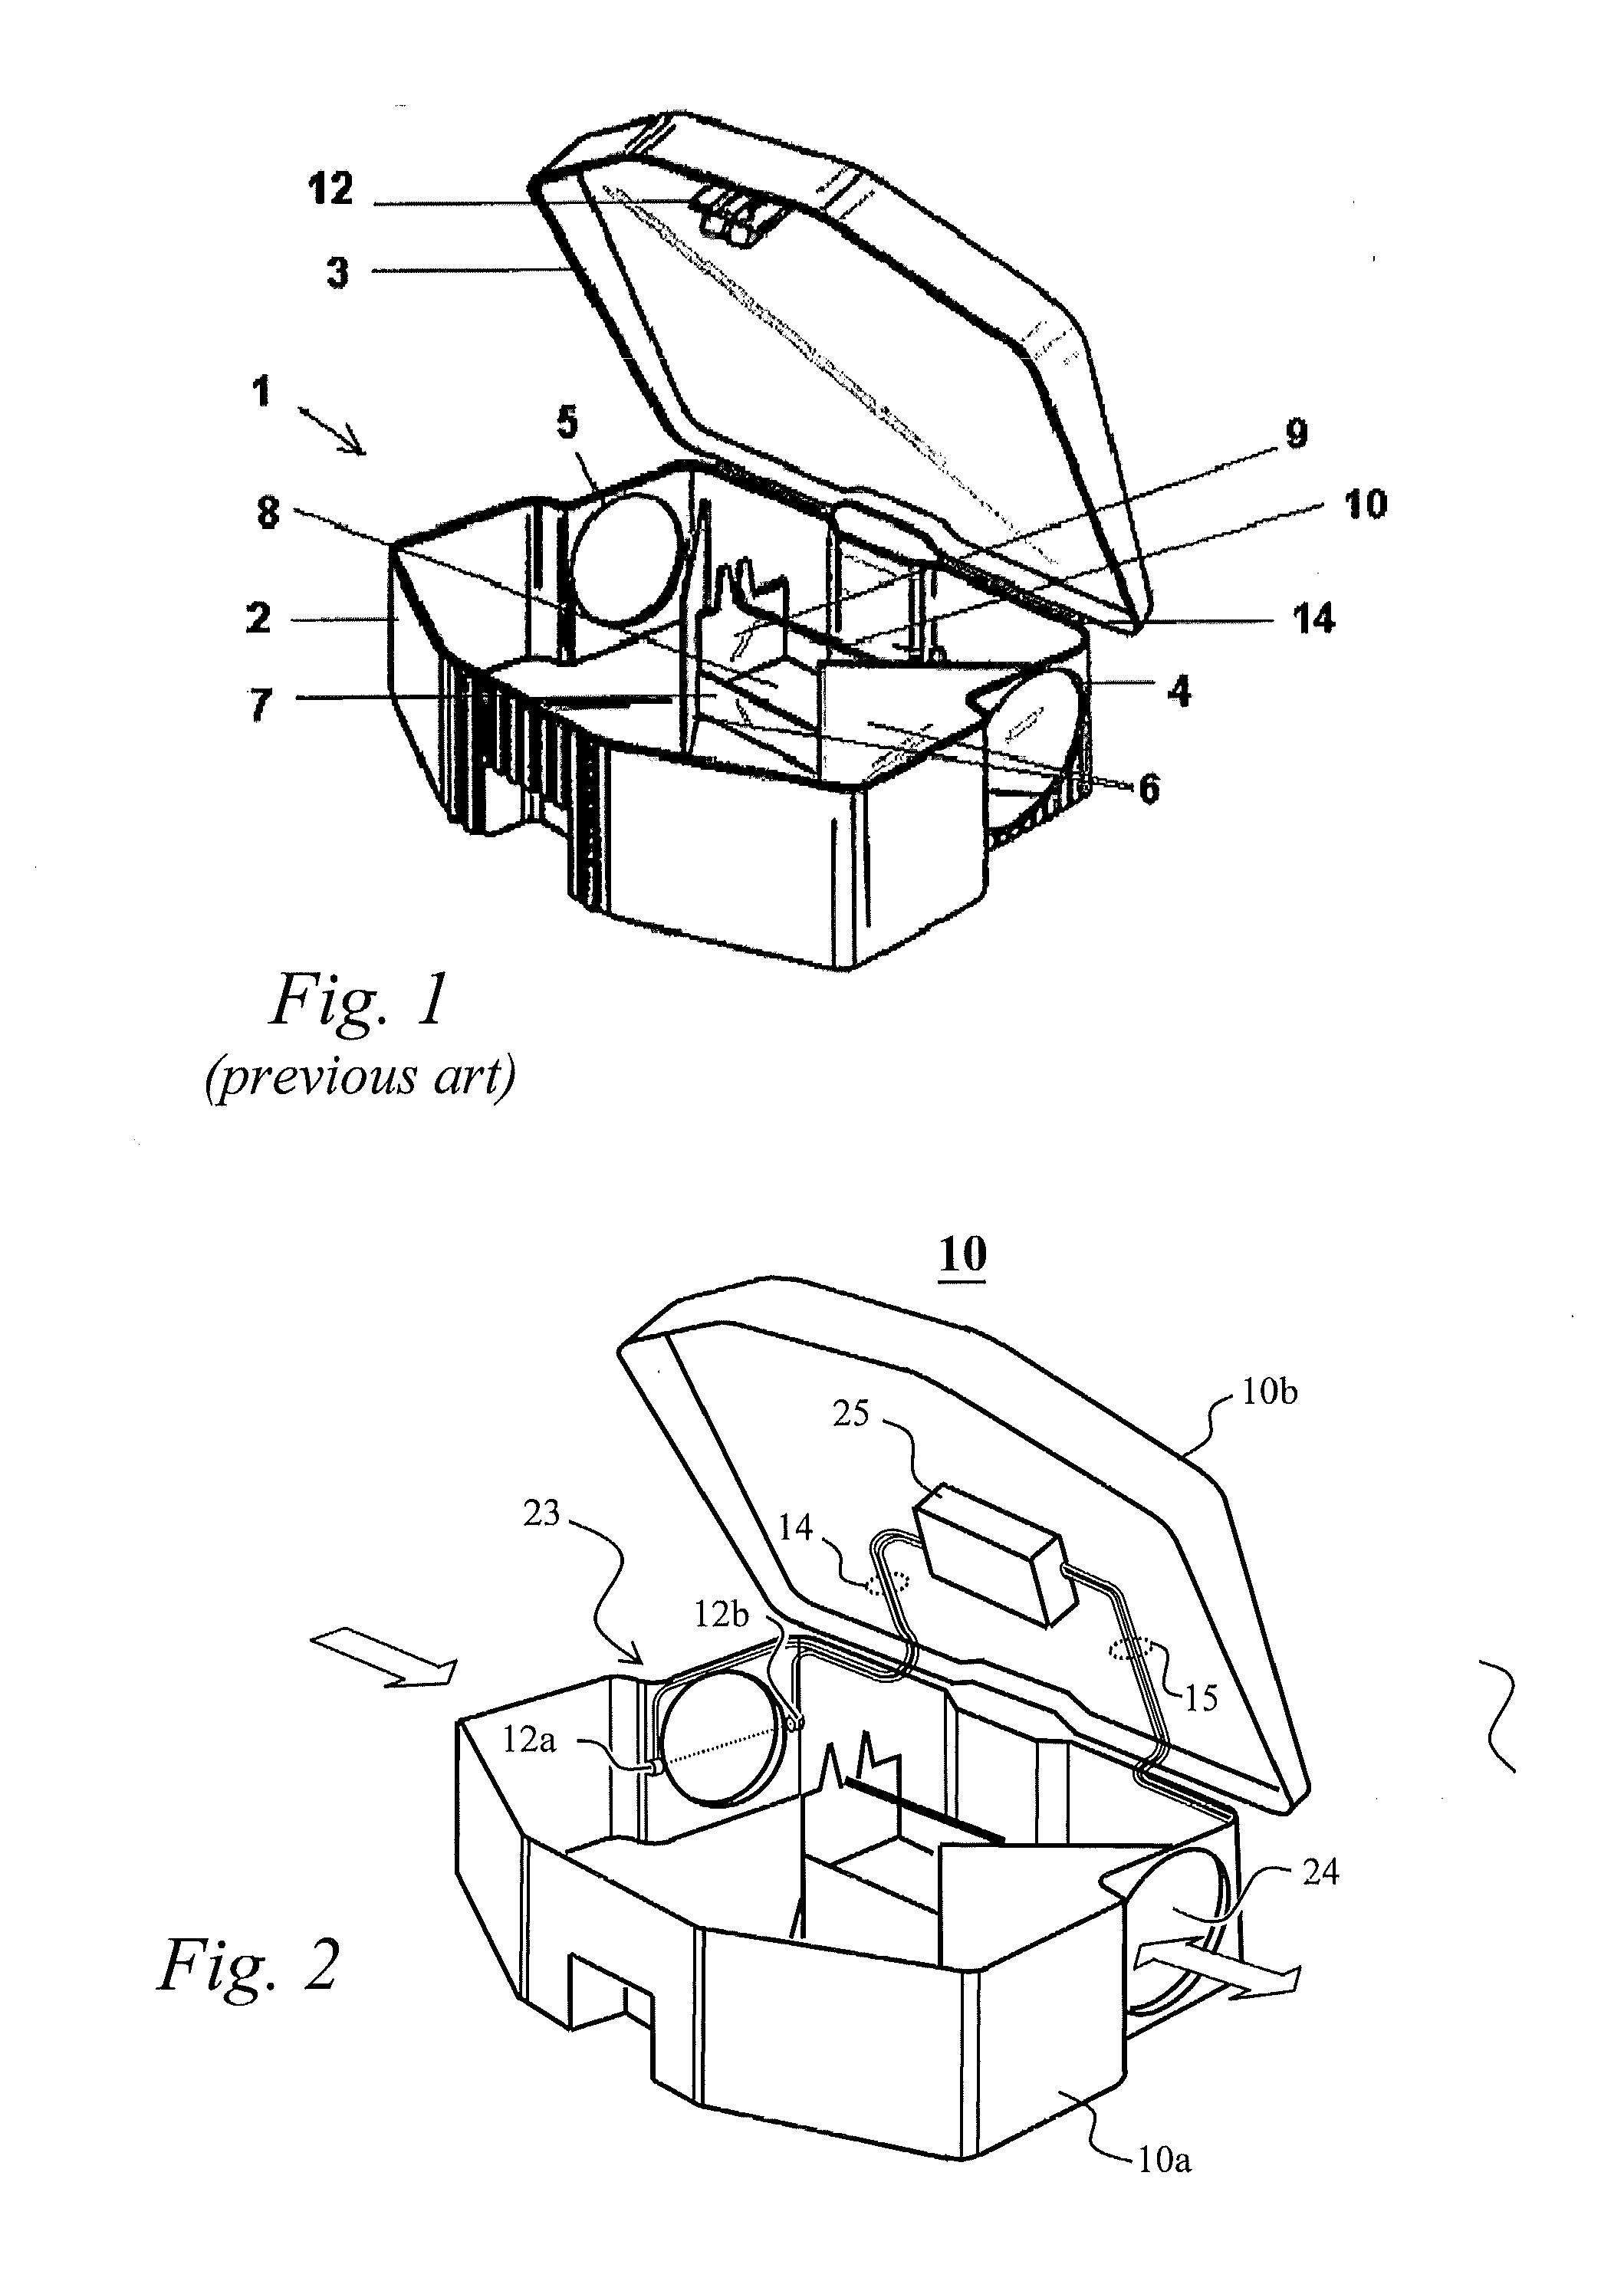 Method and system for controlling and eliminating pests